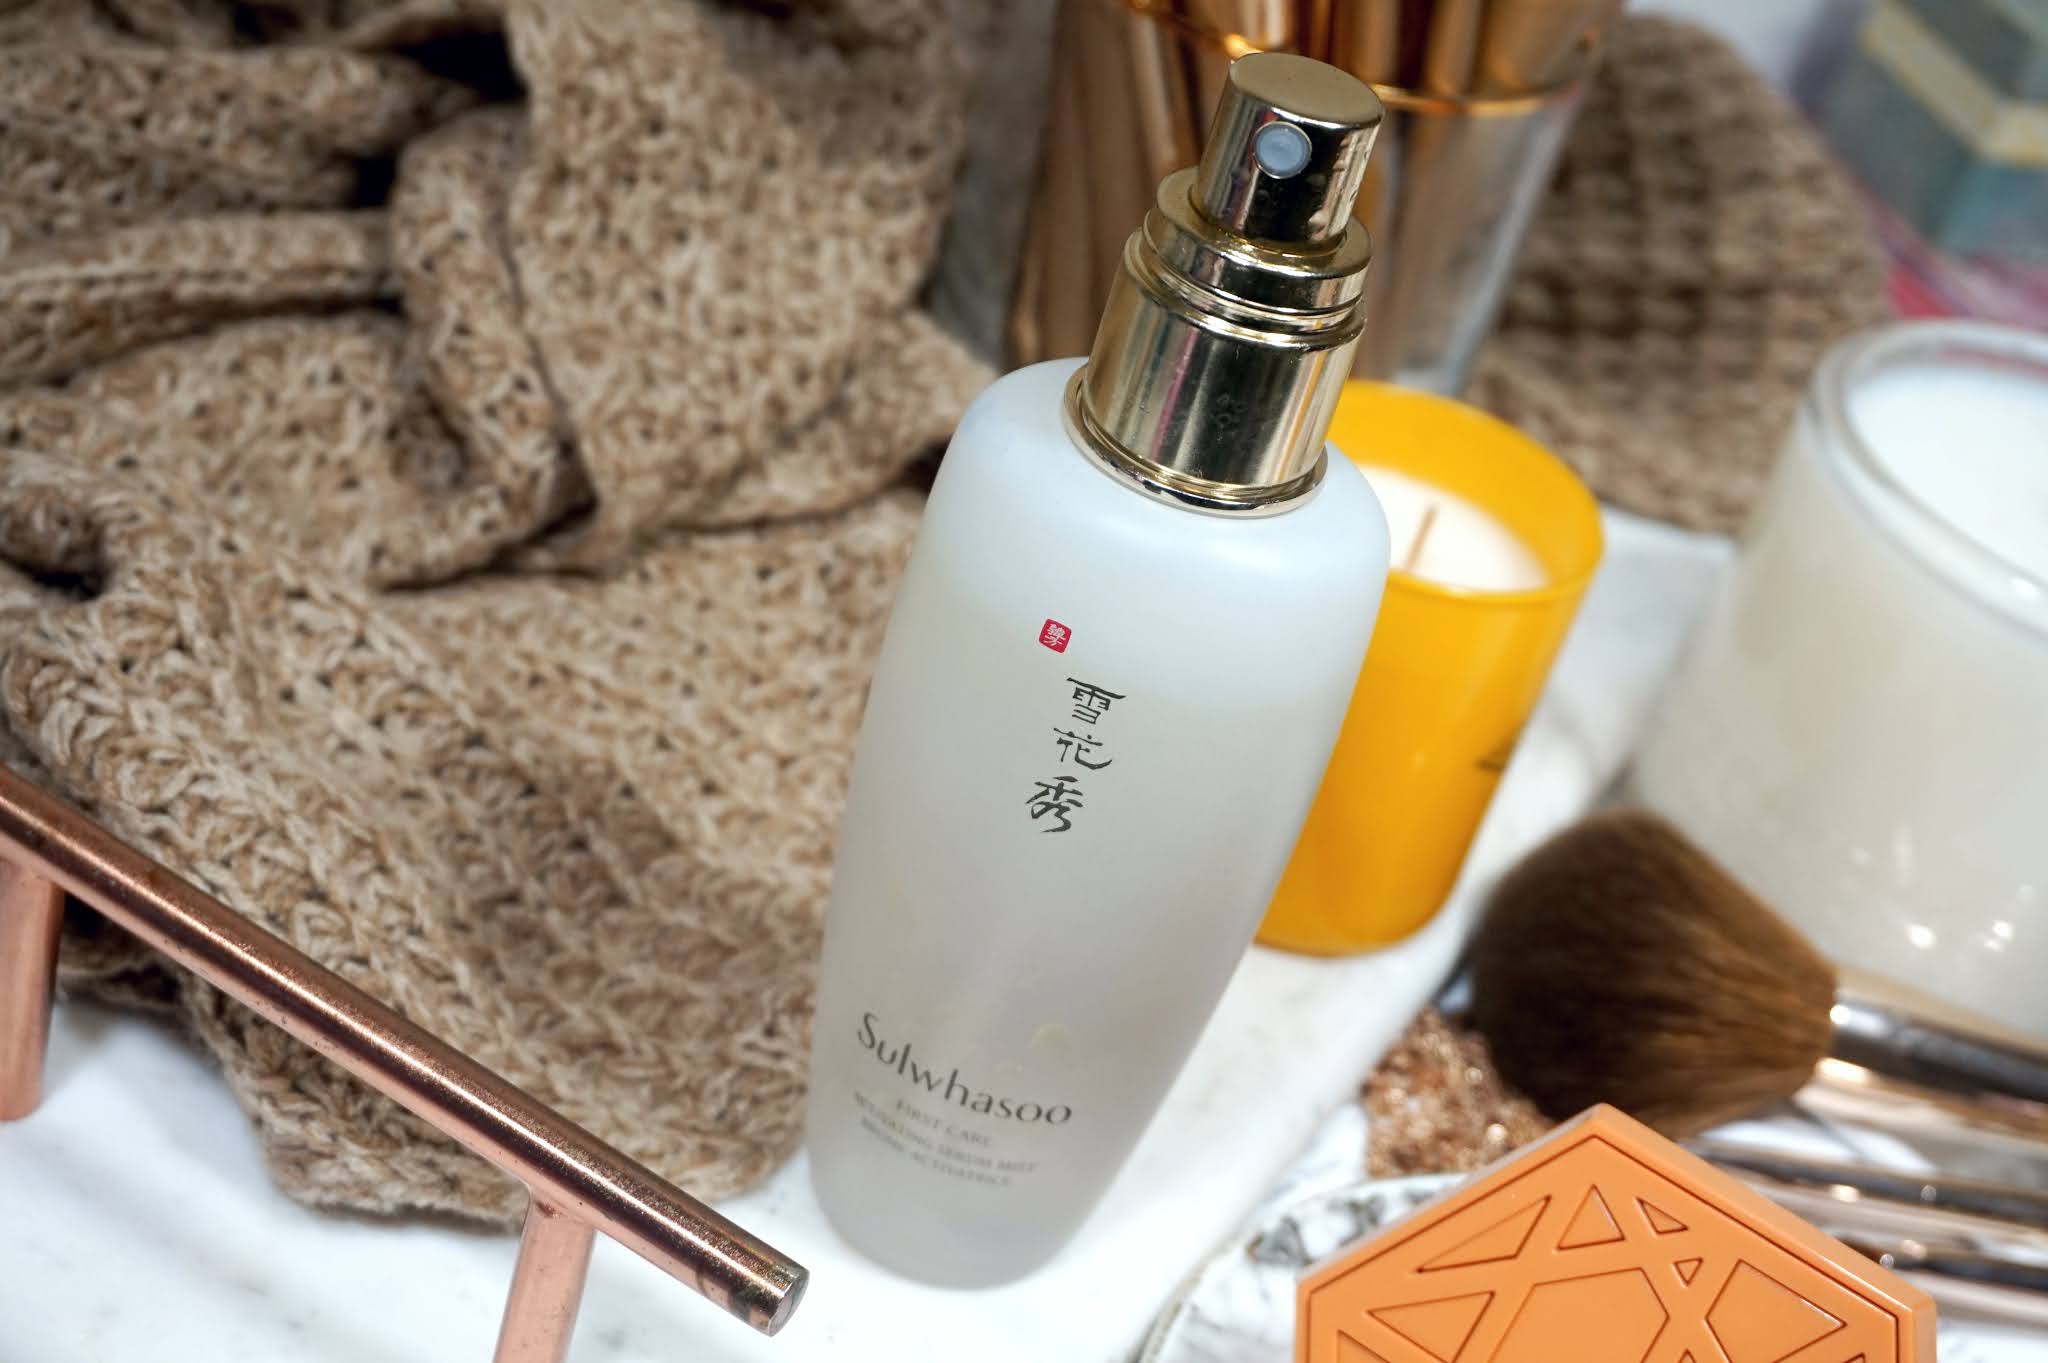 Sulwhasoo First Care Activating Serum Mist Review